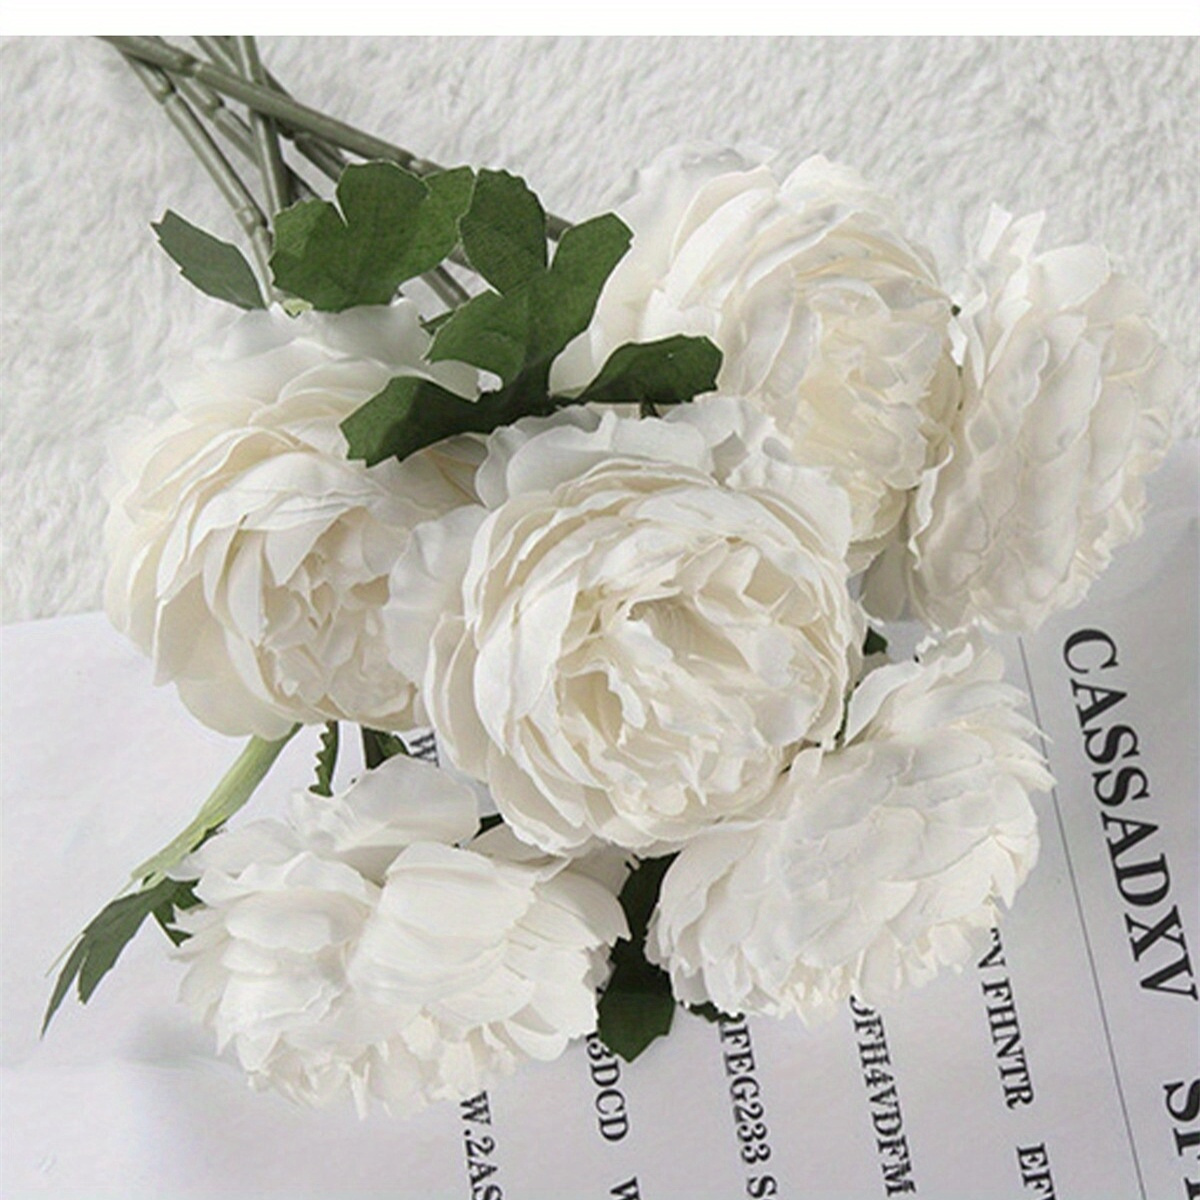 

10pcs Artificial Flower Peony Bouquet Fake Flower Western Rose Tea Rose Wedding Flower Decor Wall Accessories Home Decor Photo Props Party Birthday, Valentine's Day, Mother's Day Gift